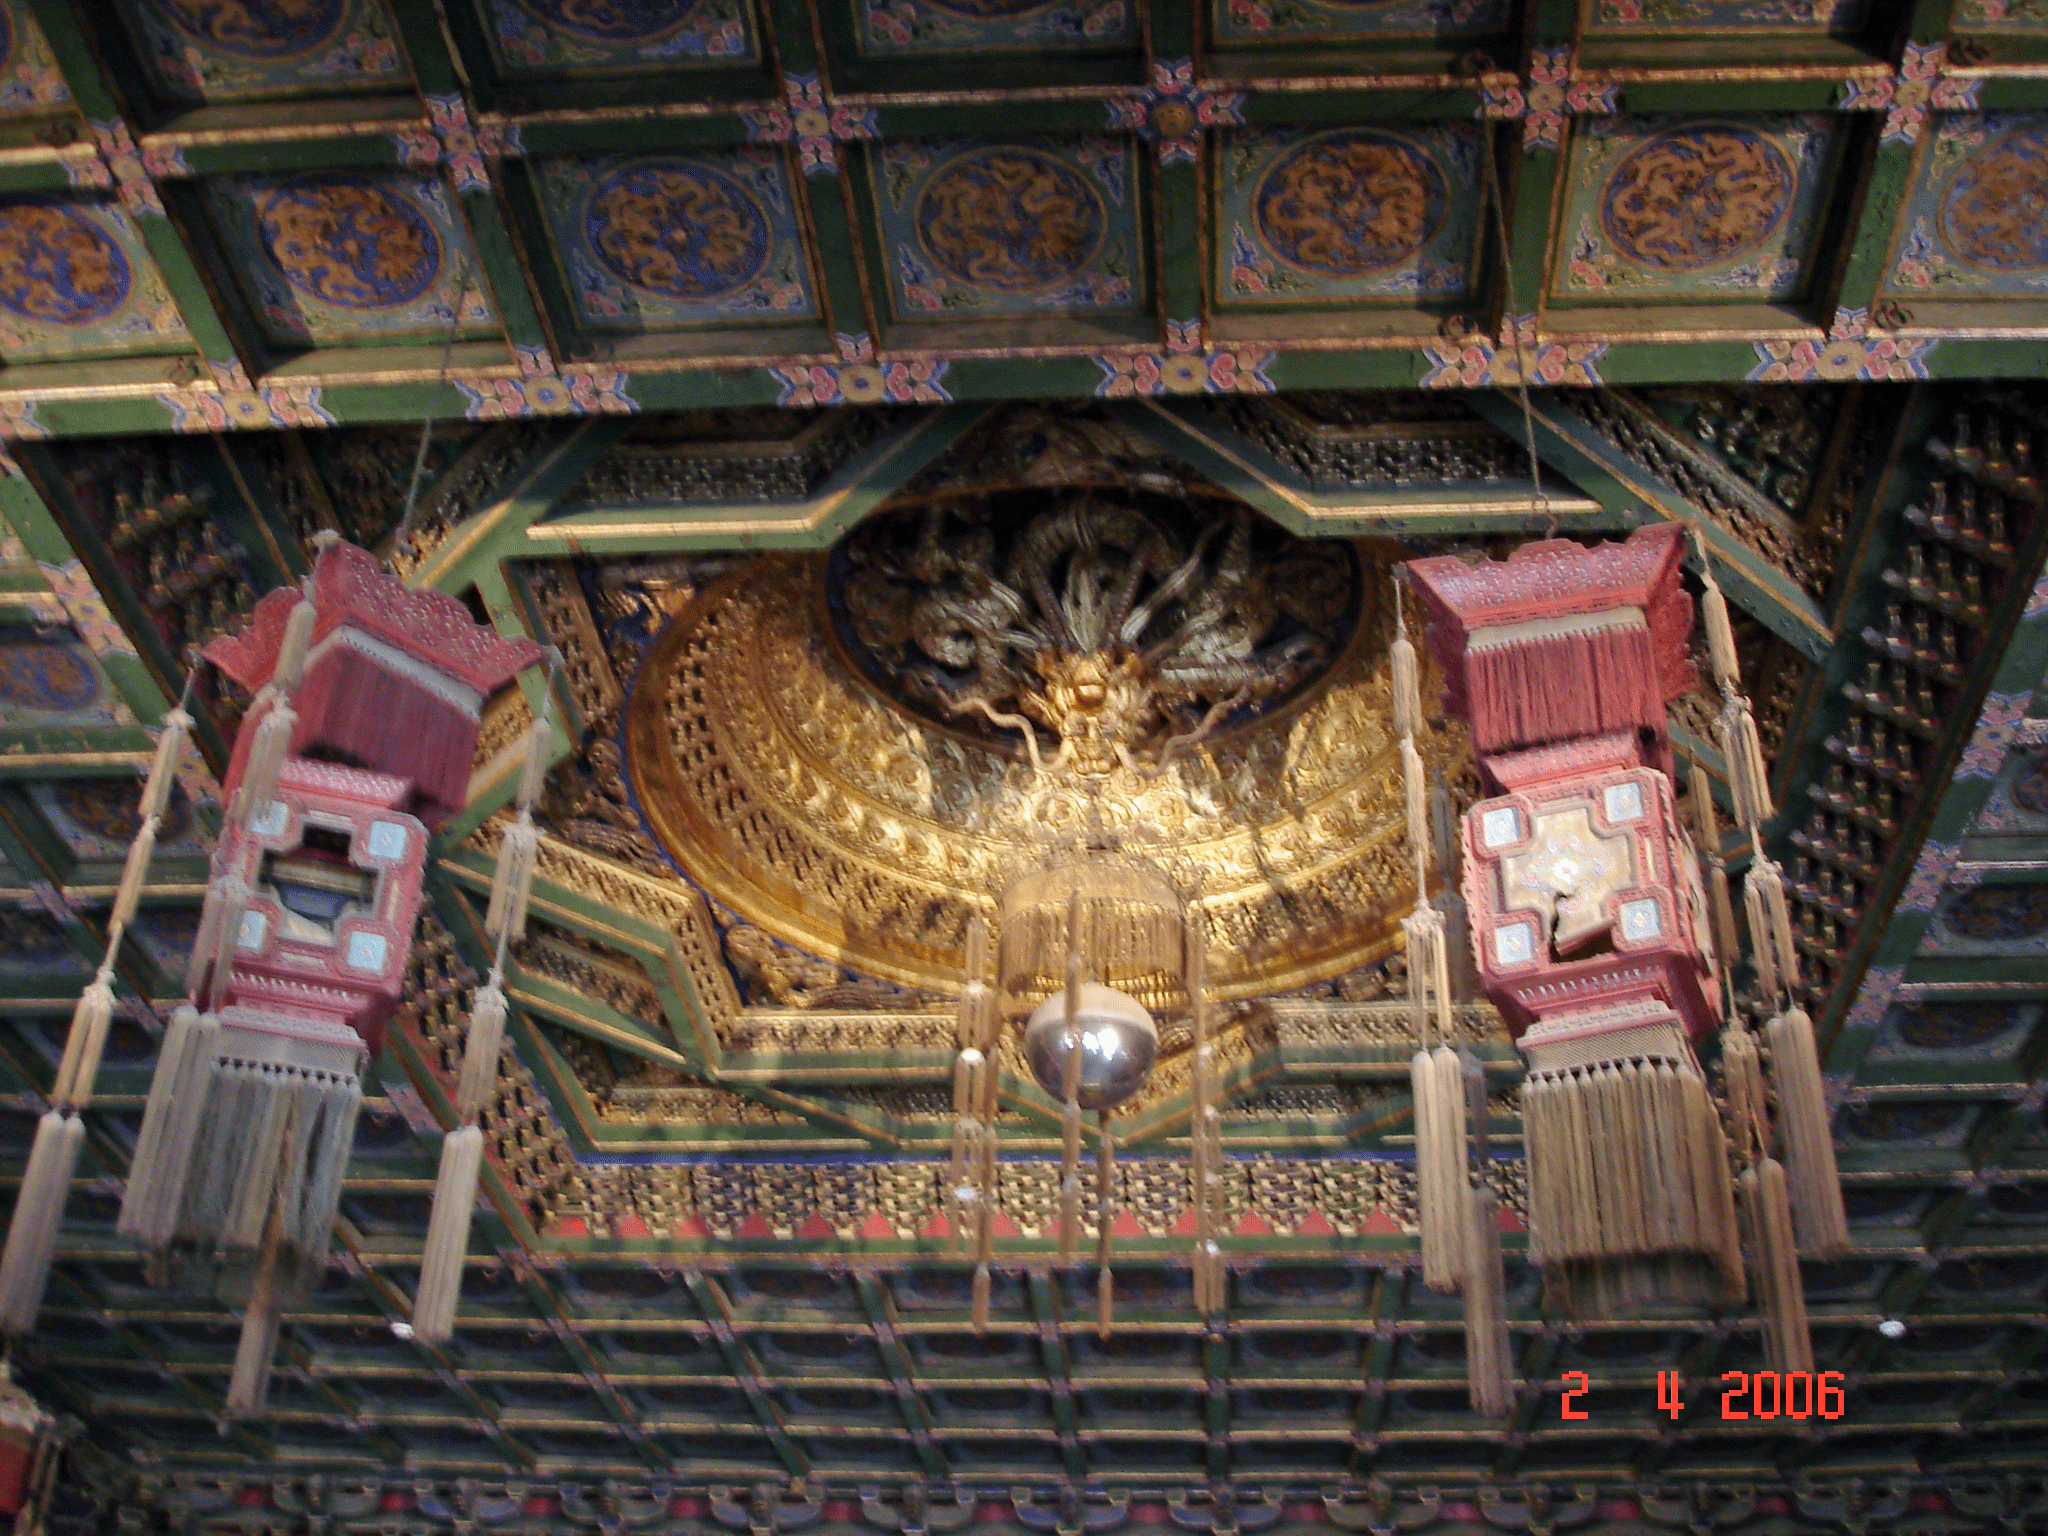 A caission of golden dragons above the throne in the Emperors Throne room.